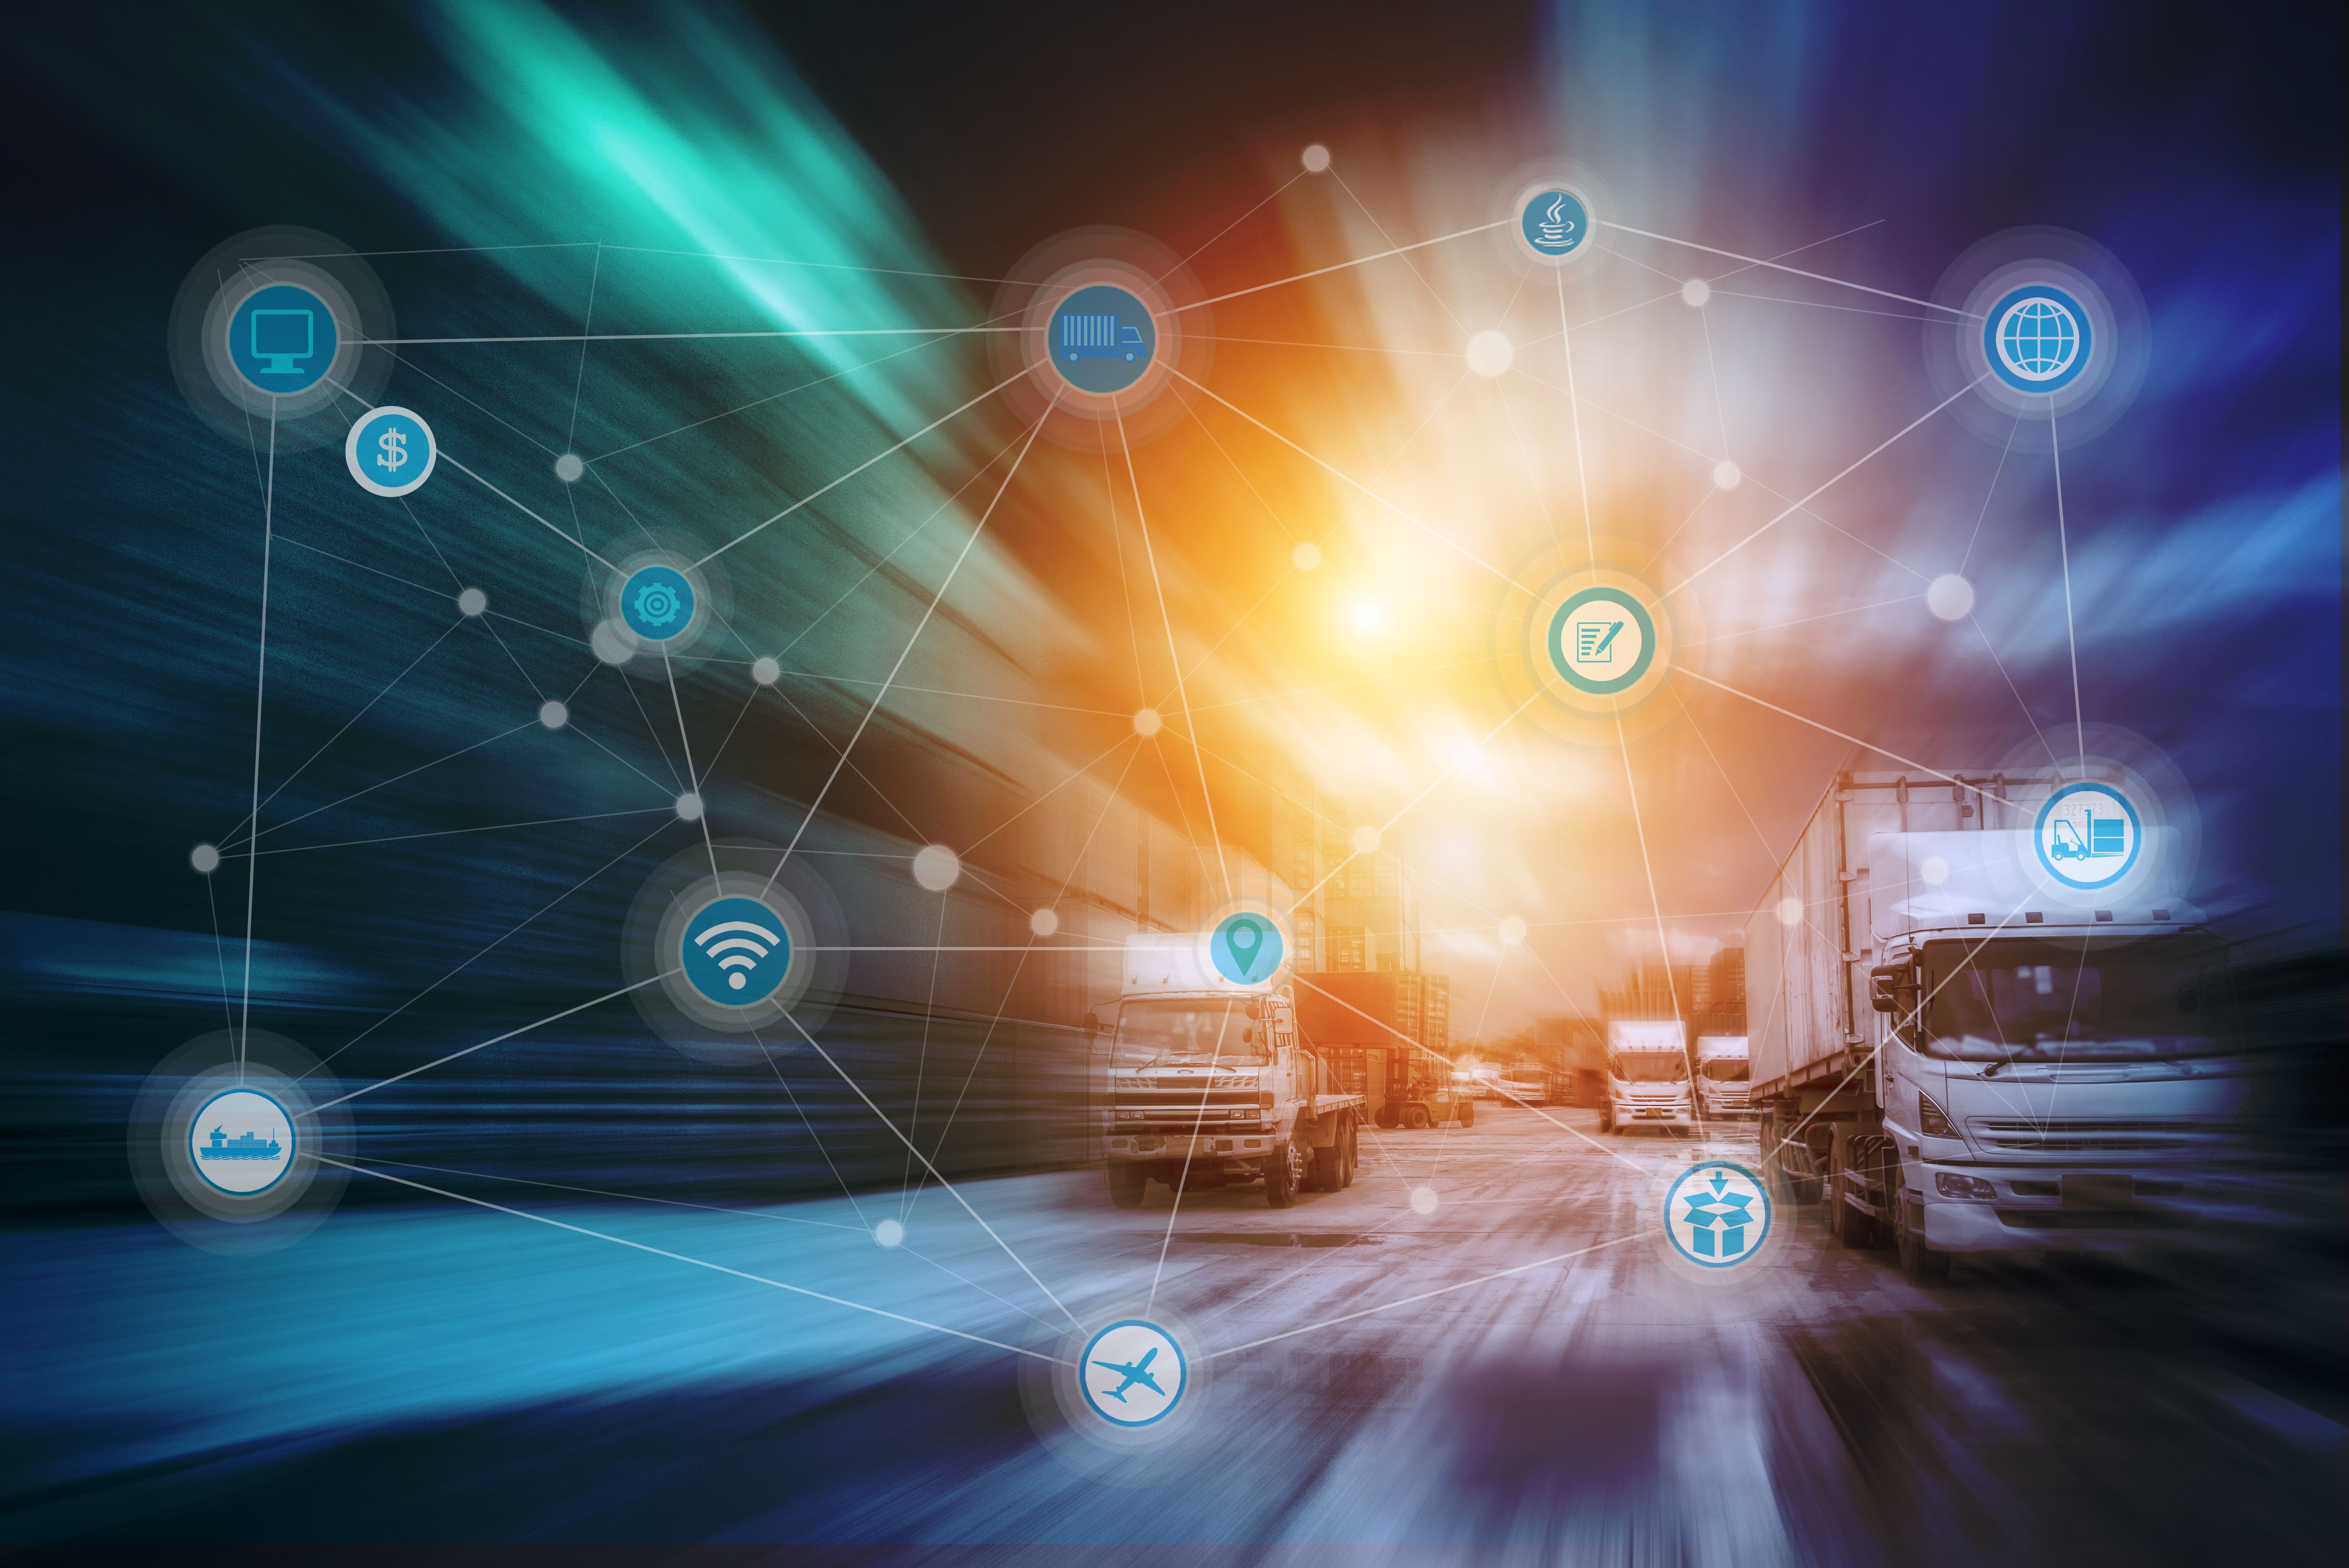 Embracing the Latest Technologies for Next-Generation Connected Vehicles